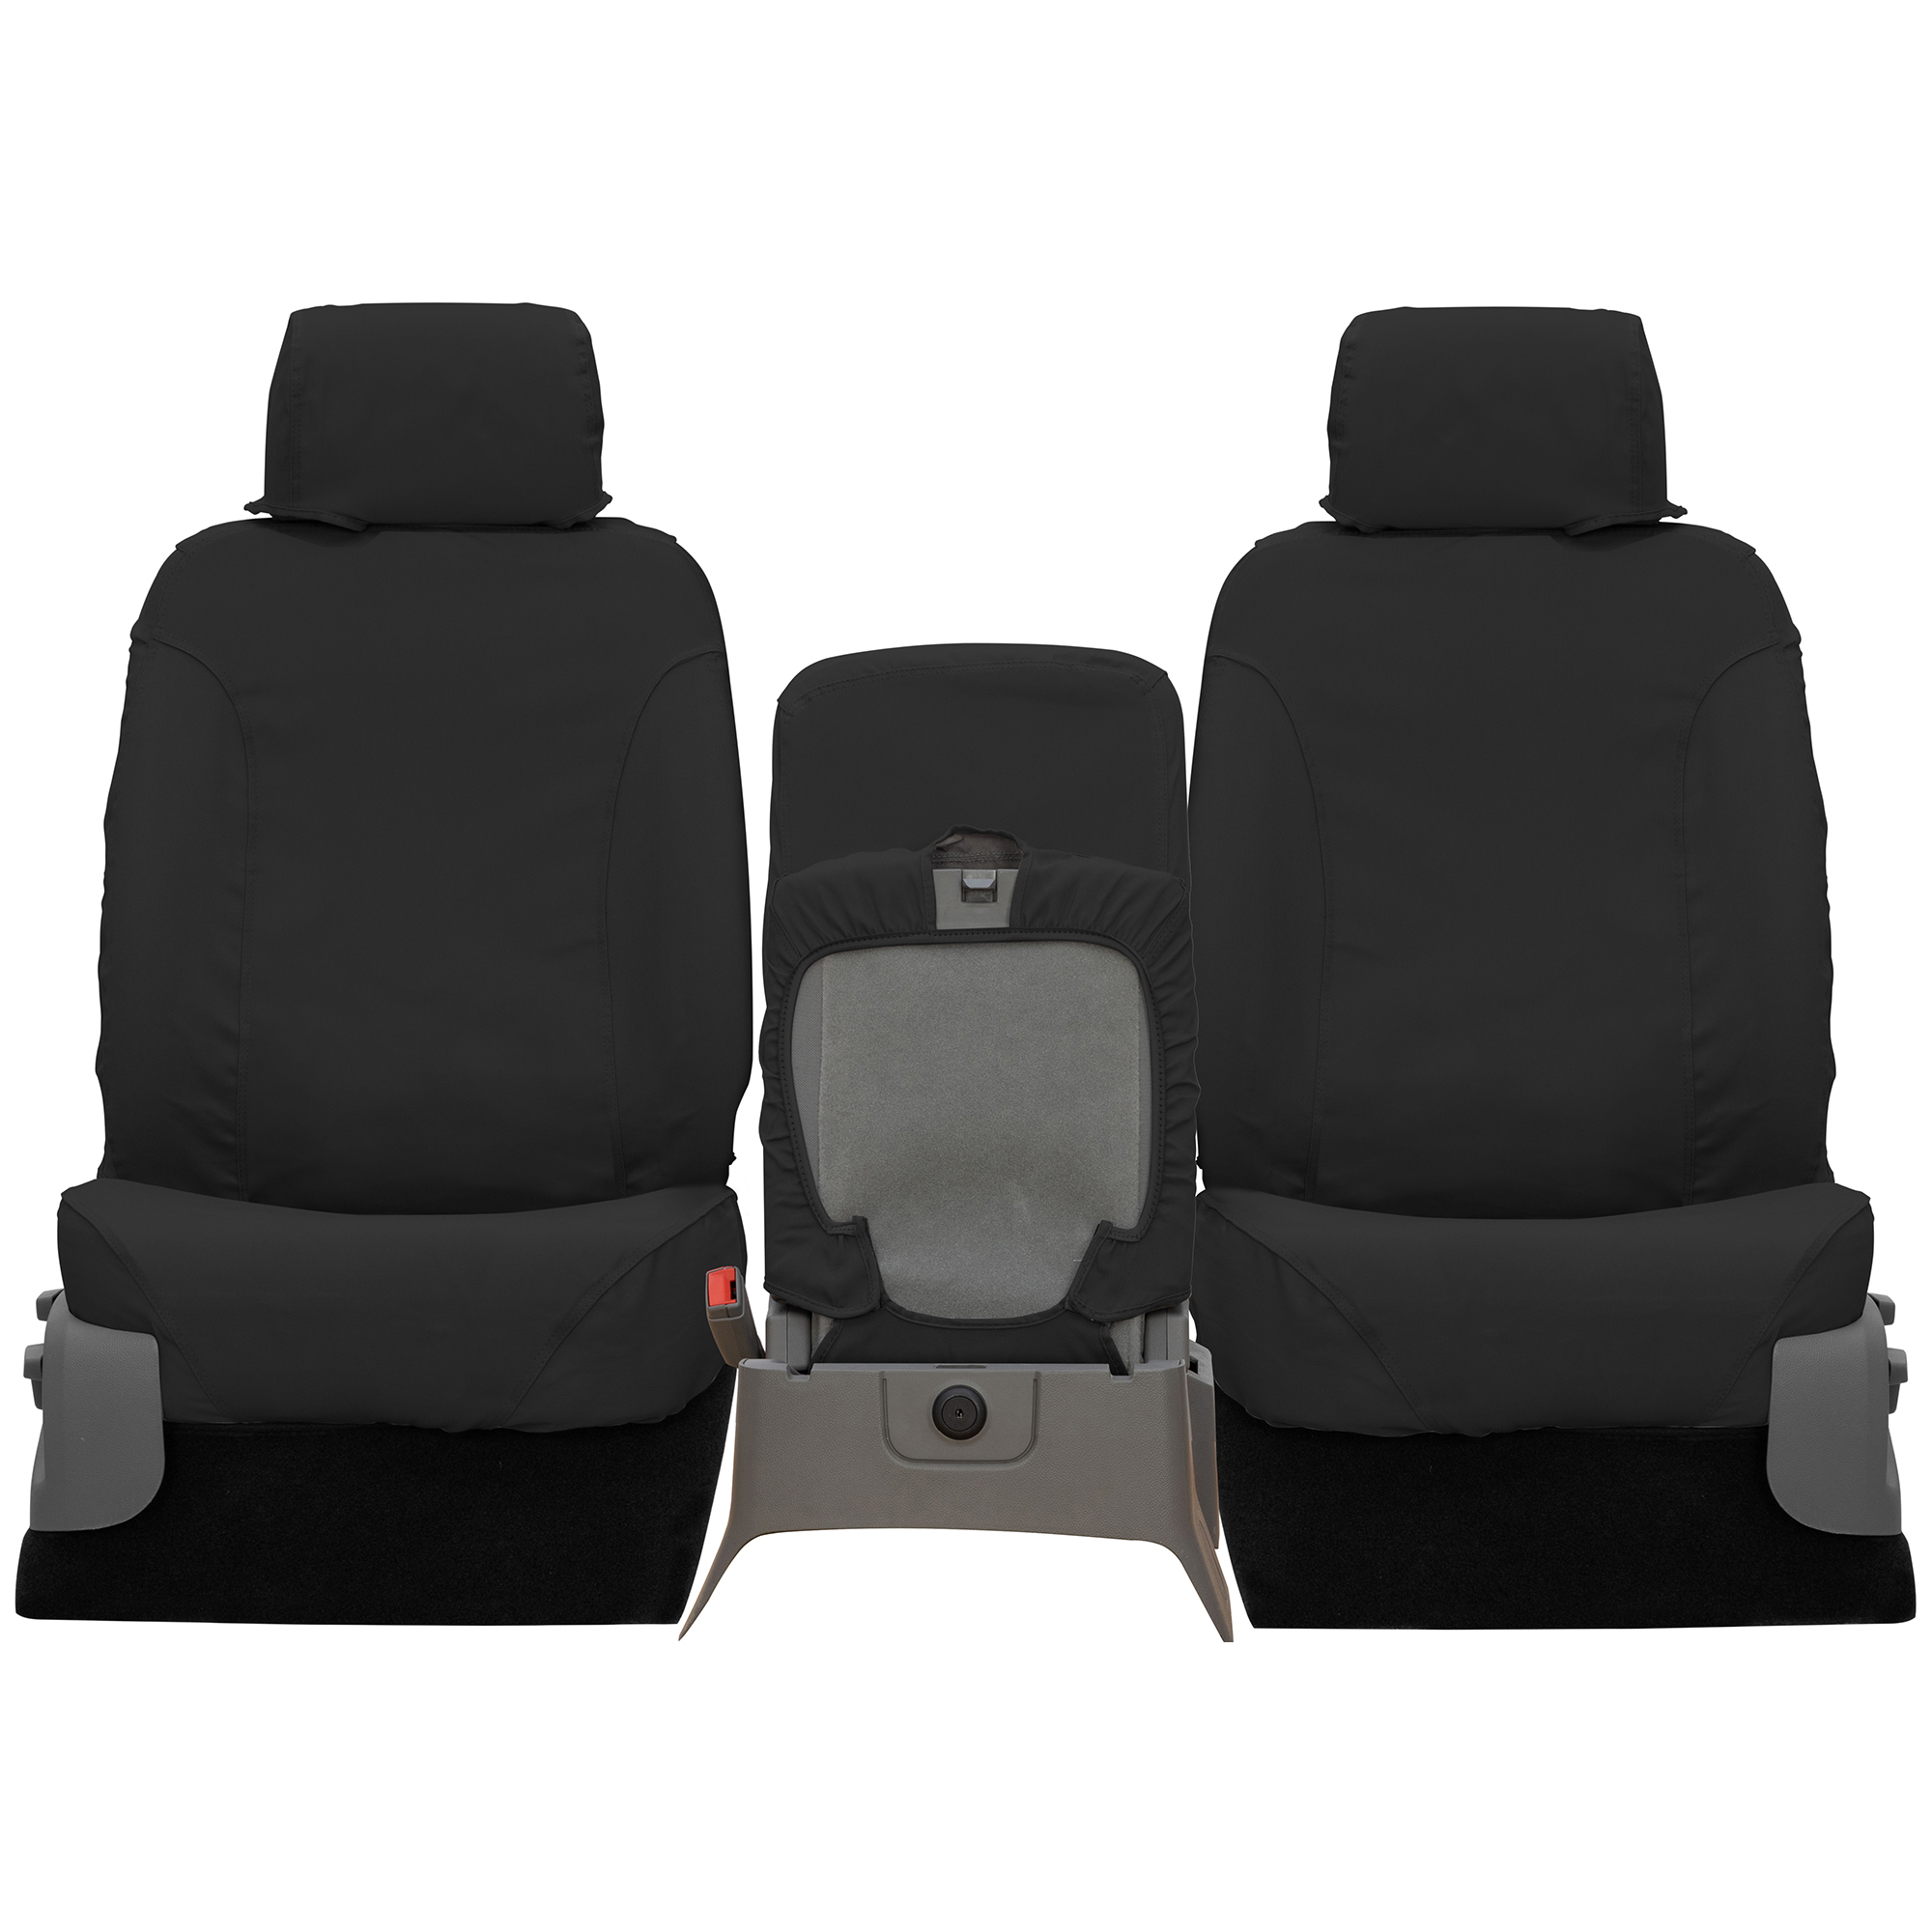 Covercraft Polycotton SeatSaver Custom Seat Covers for Ford F-150/F-250/F-350/F-450/F-550 Models - image 4 of 7